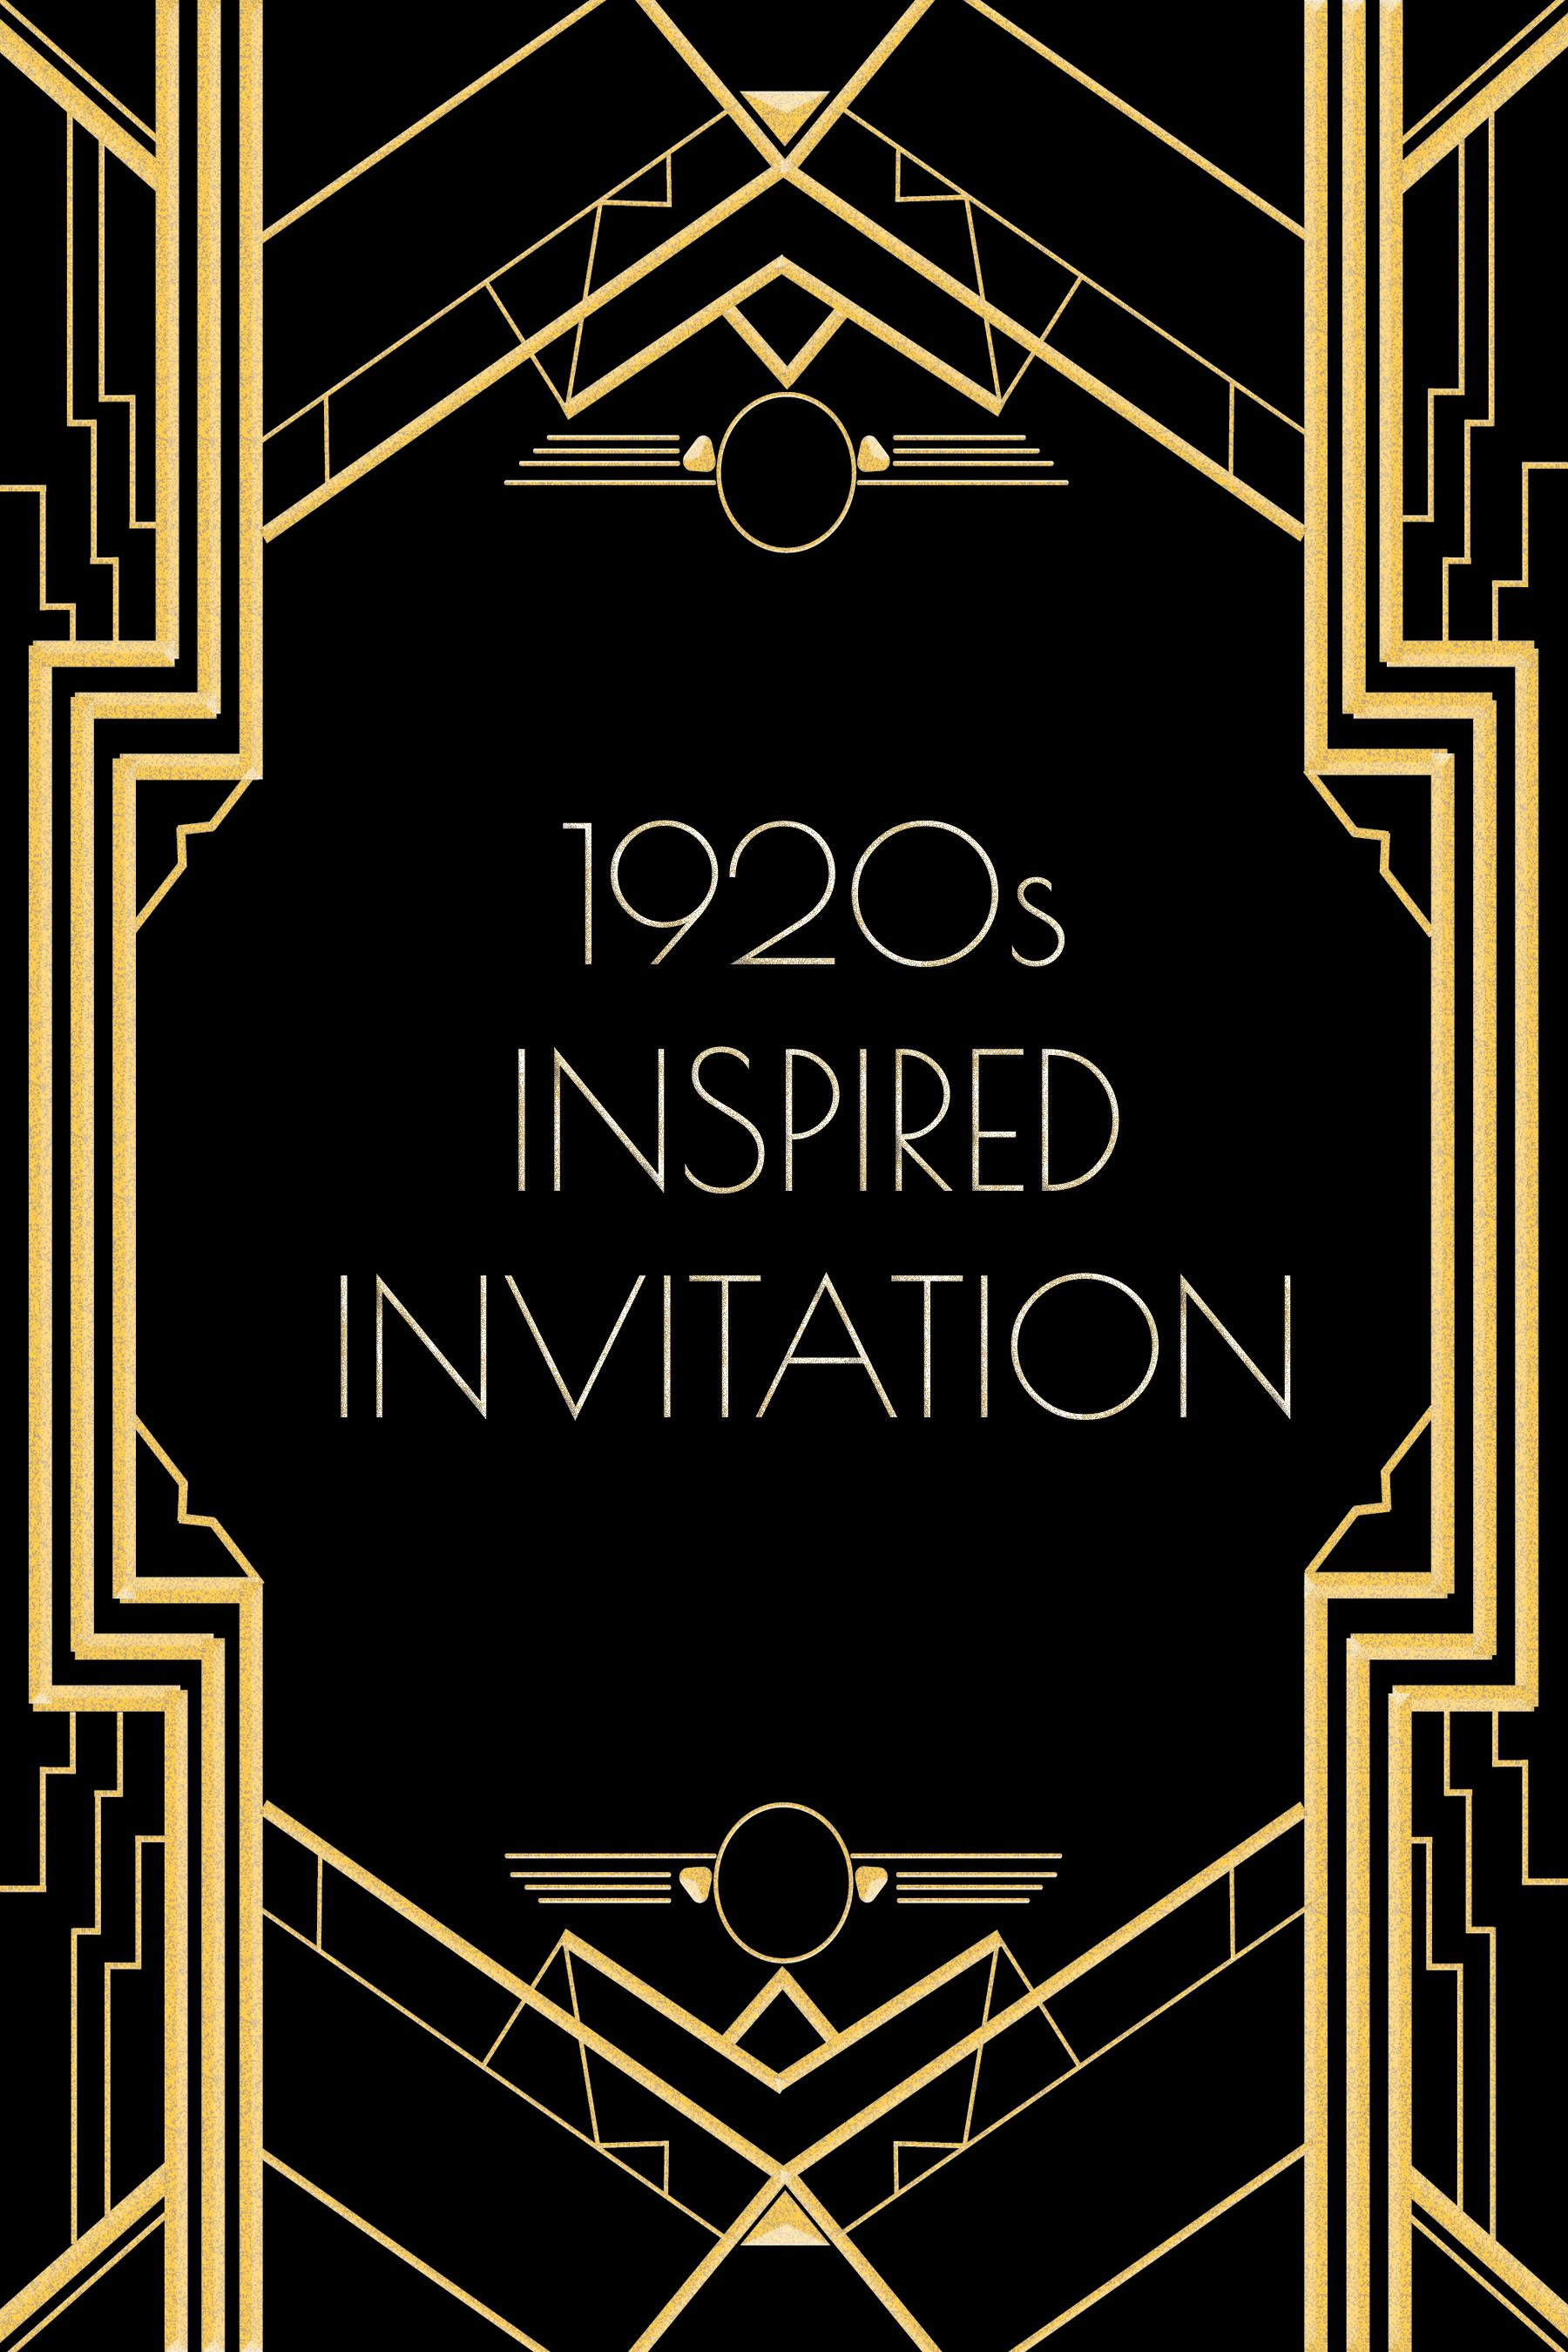 20s Years Cabaret Photos Use This 1920s Inspired Invitation inside dimensions 1800 X 2700